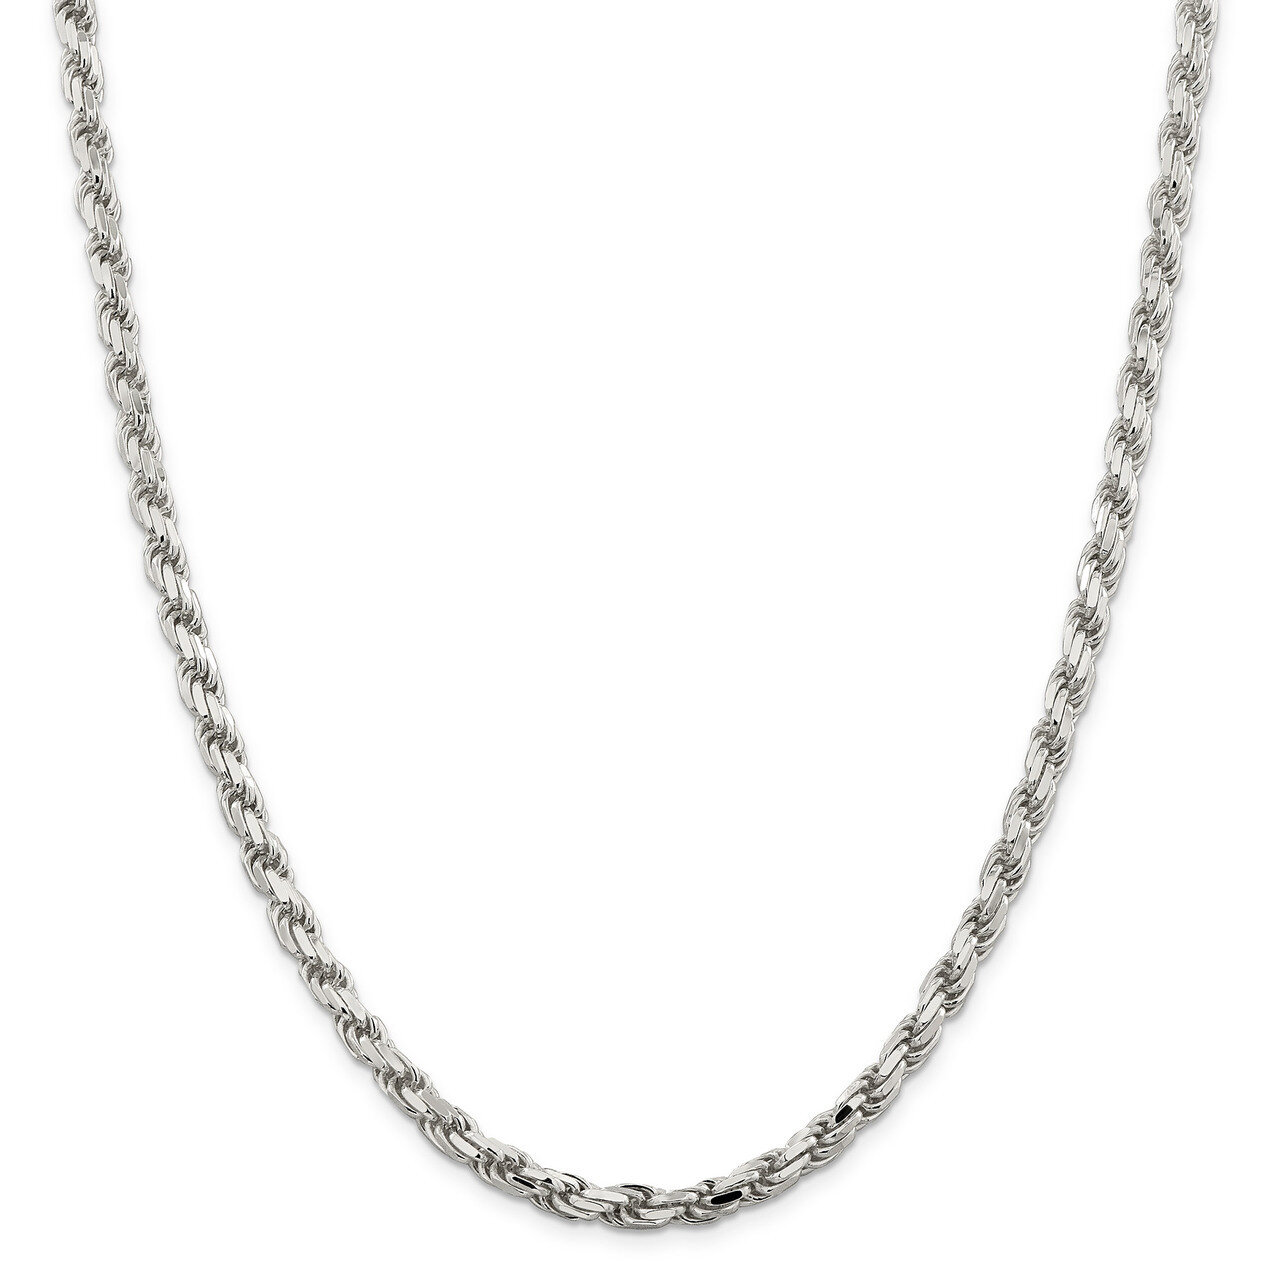 22 Inch 5.75mm Diamond-cut Rope Chain Sterling Silver QDC120-22